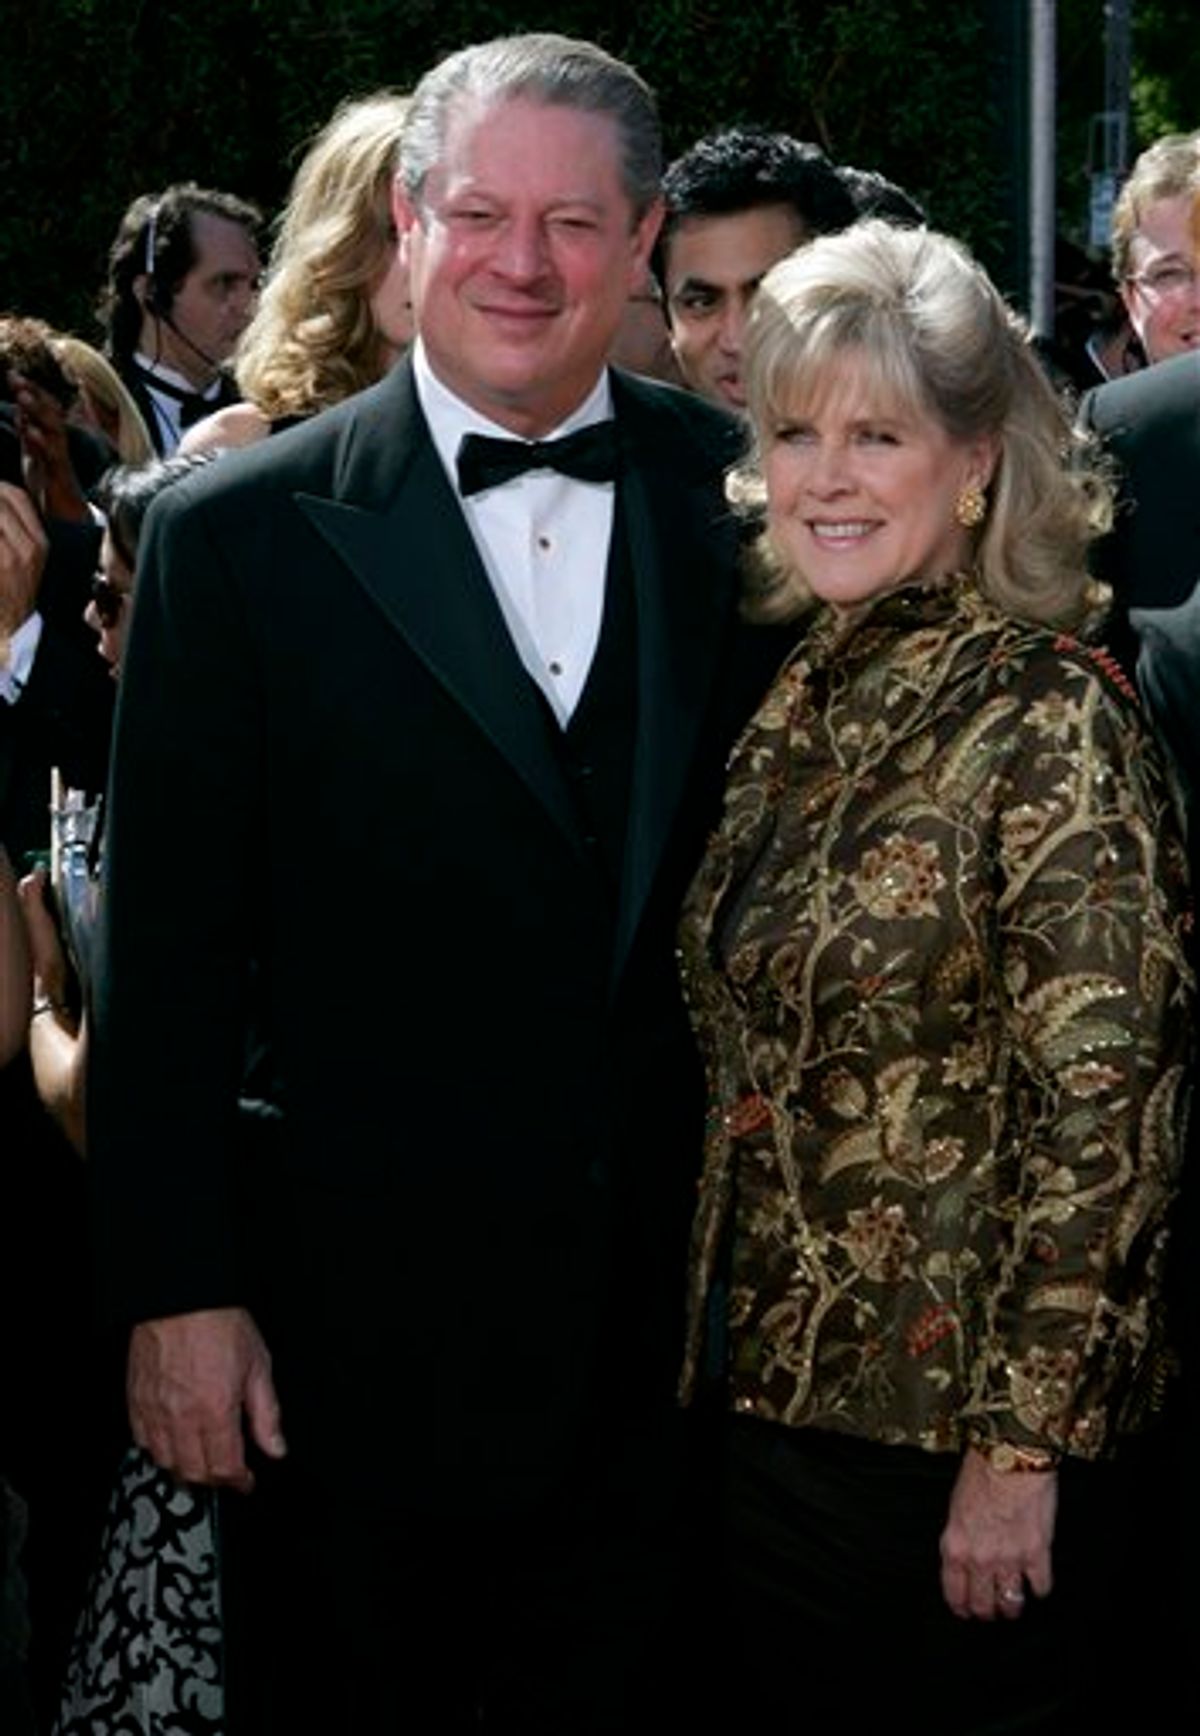 FILE - In this Sept. 16, 2007 file photo, former Vice President Al Gore and his wife, Tipper Gore arrive for the 59th Primetime Emmy Awards at the Shrine Auditorium in Los Angeles. Former Vice President Al Gore and his wife, Tipper, are separating after 40 years of marriage. (AP Photo/Chris Carlson, File) (AP)